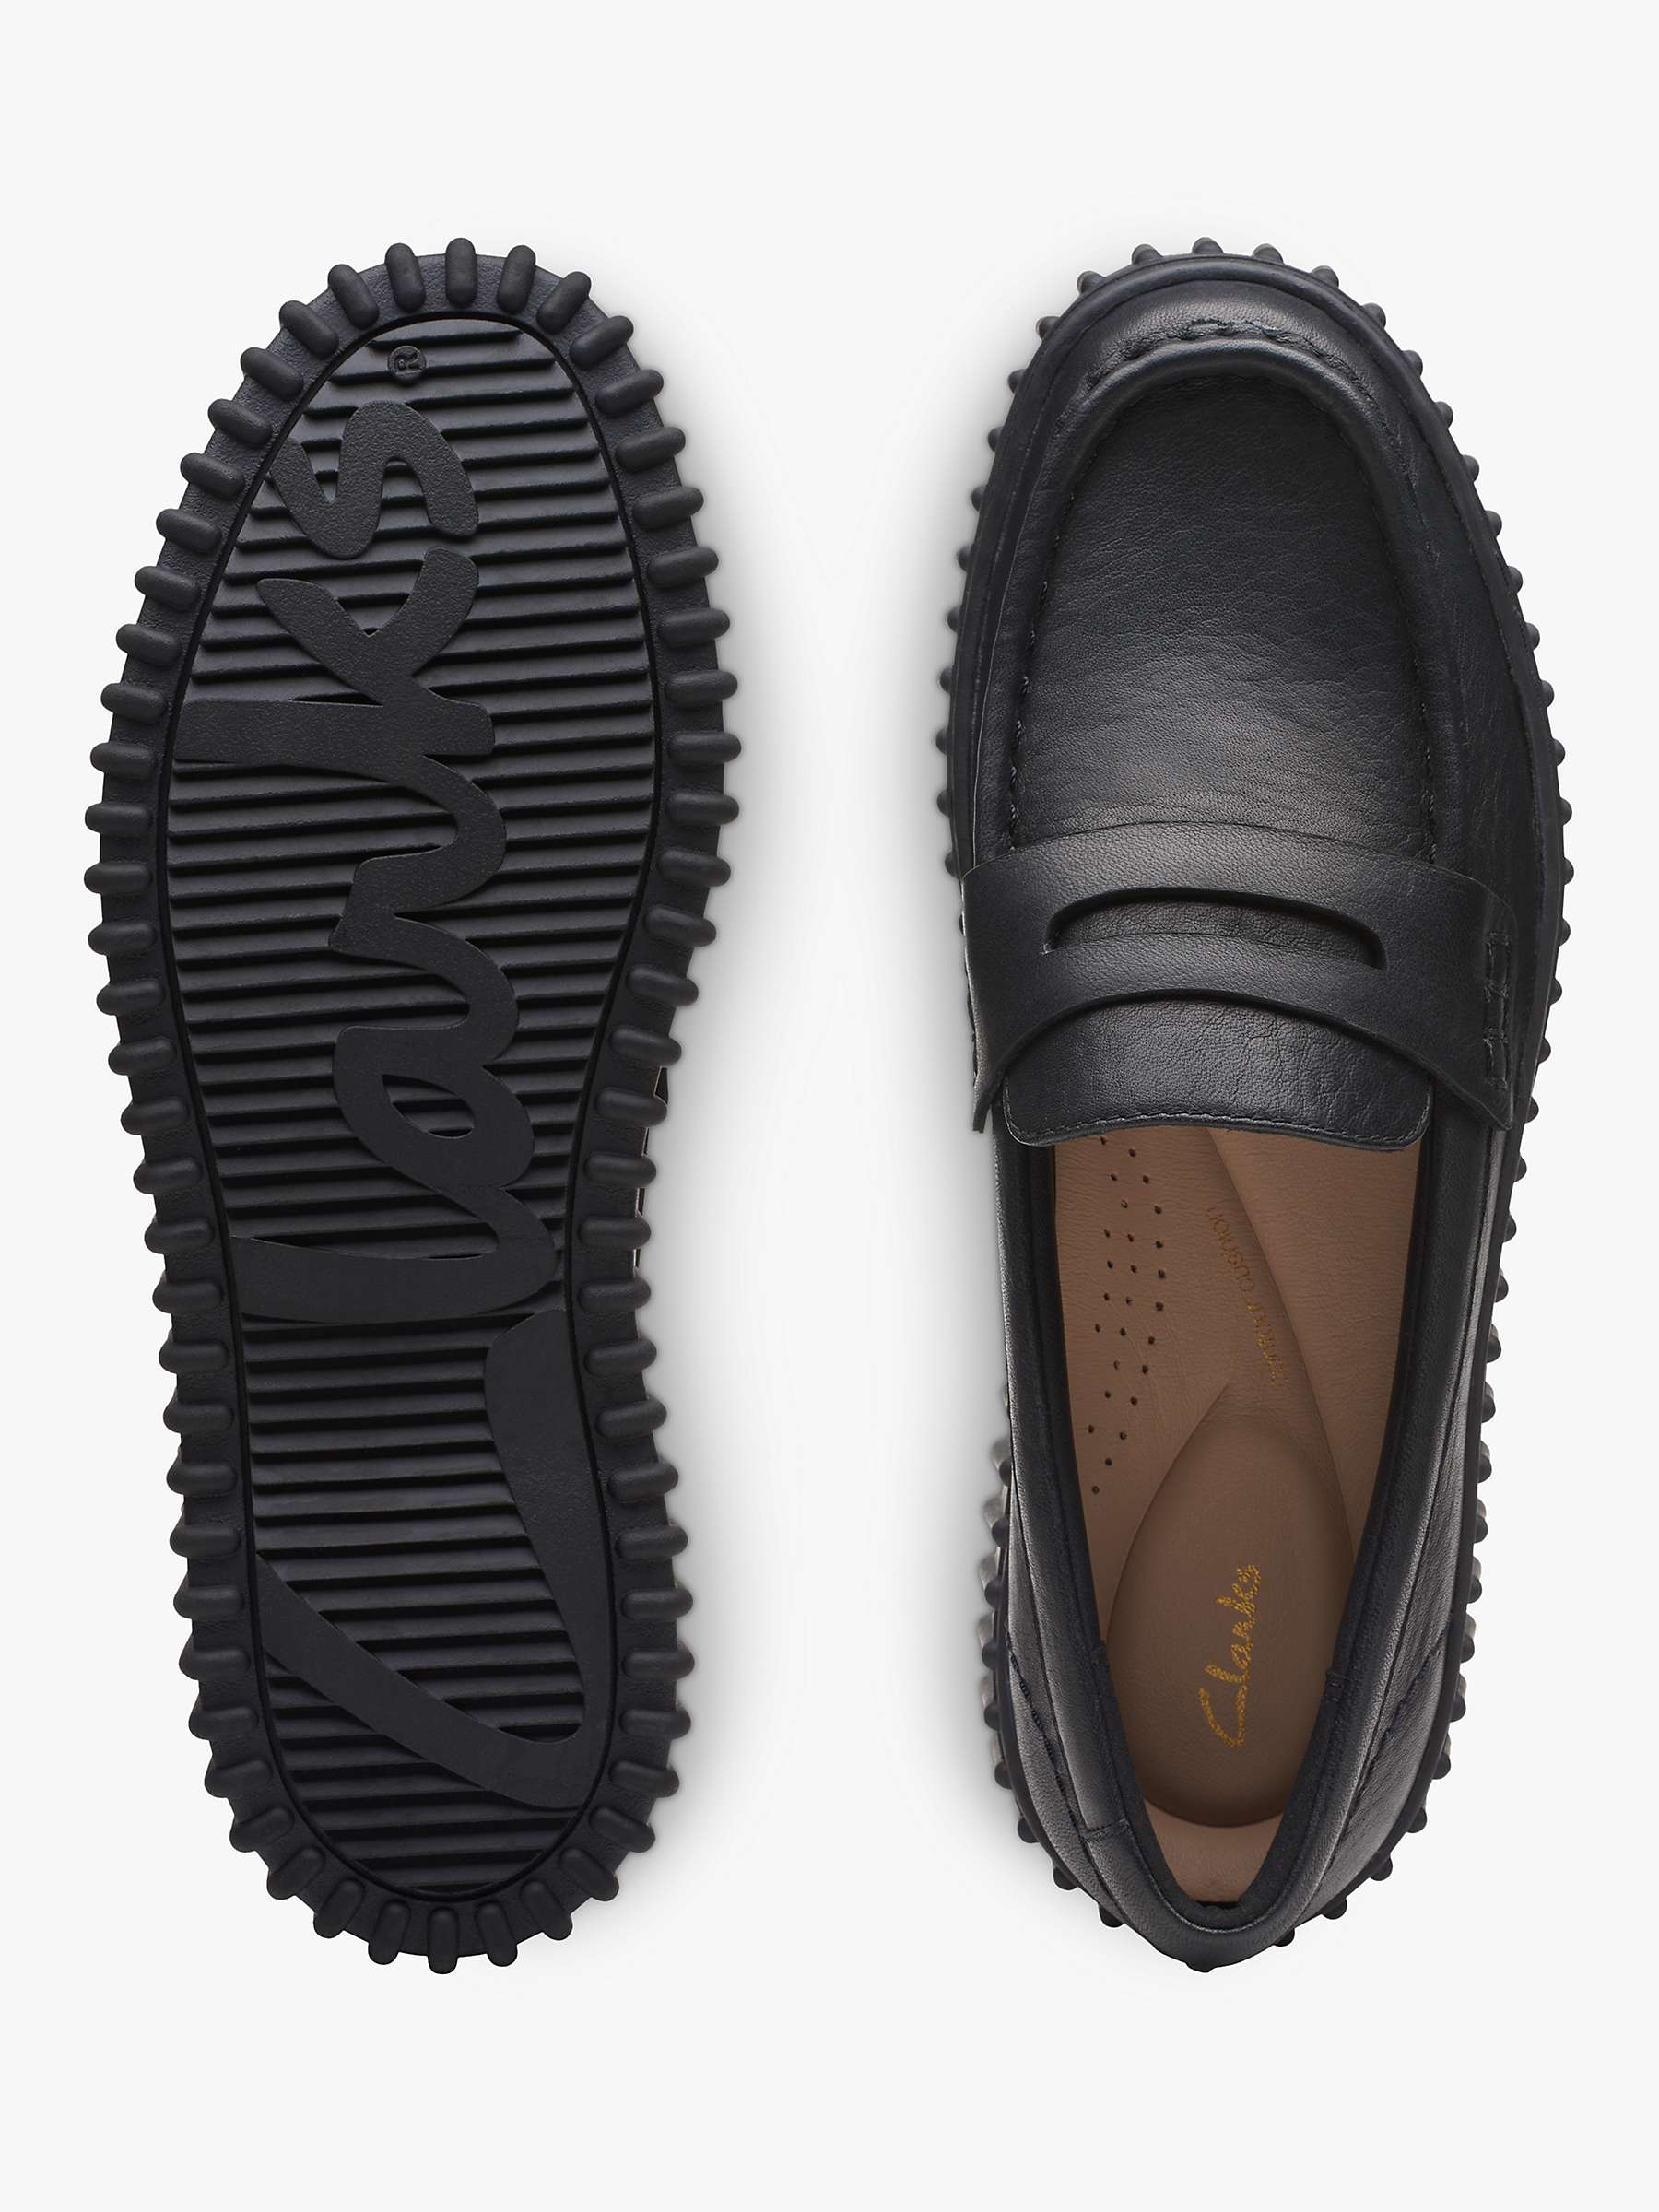 Buy Clarks Torhill Penny Leather Shoes, Black Online at johnlewis.com